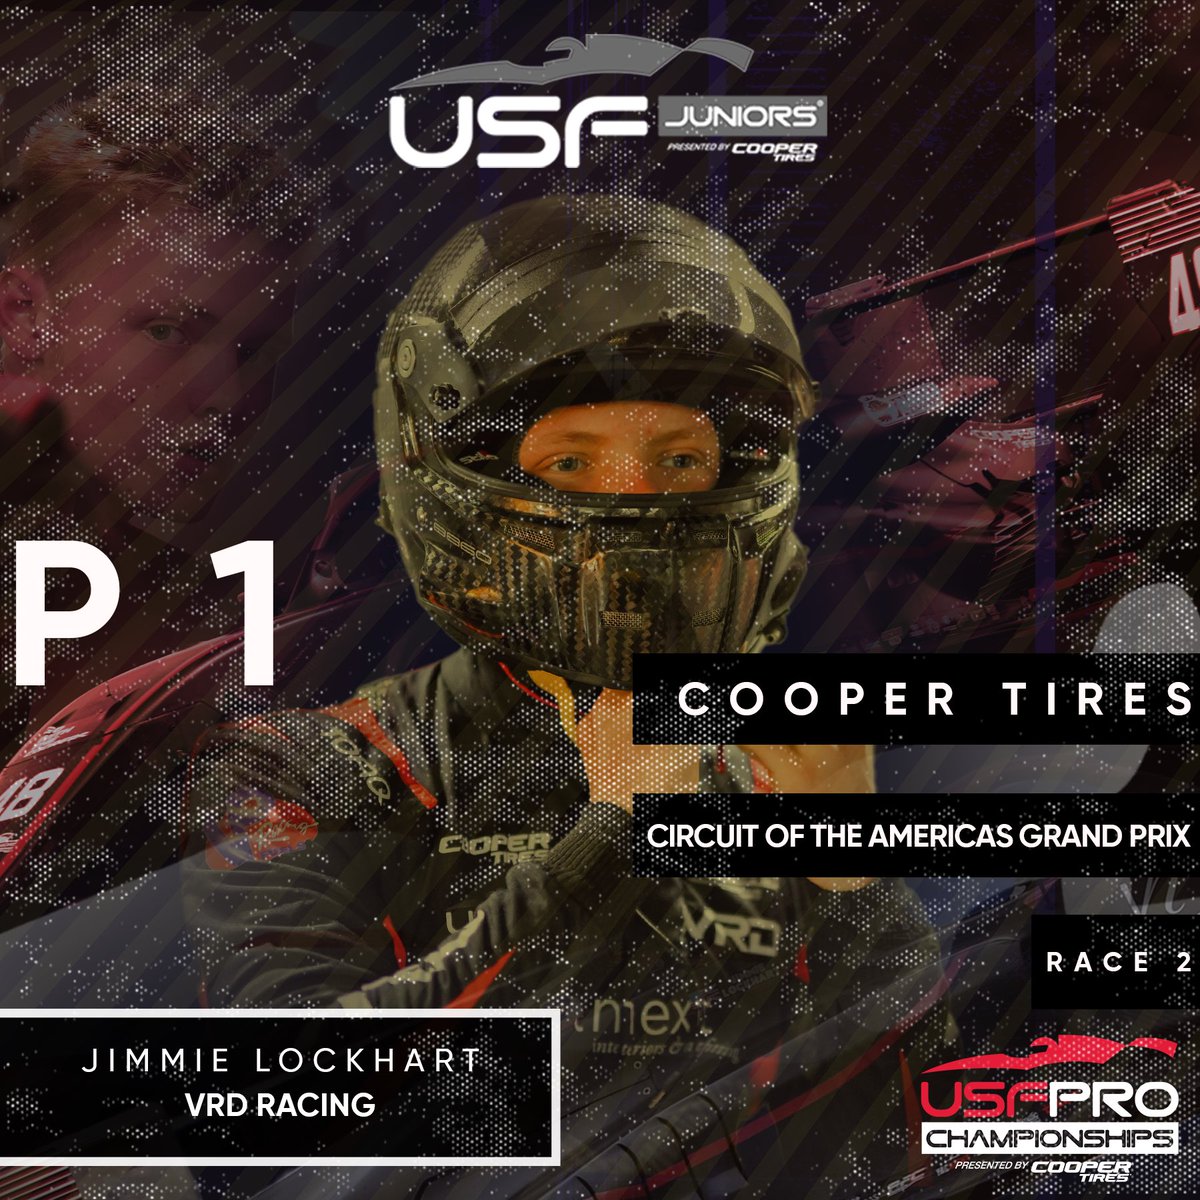 ‼️ FIRST WIN SECURED ‼️ Jimmie Lockhart finally breaks through to snag his first P1 in @usfjuniors, coming out on top in a wild Race 2 from COTA 🔥 #USFPro | #TeamCooperTire